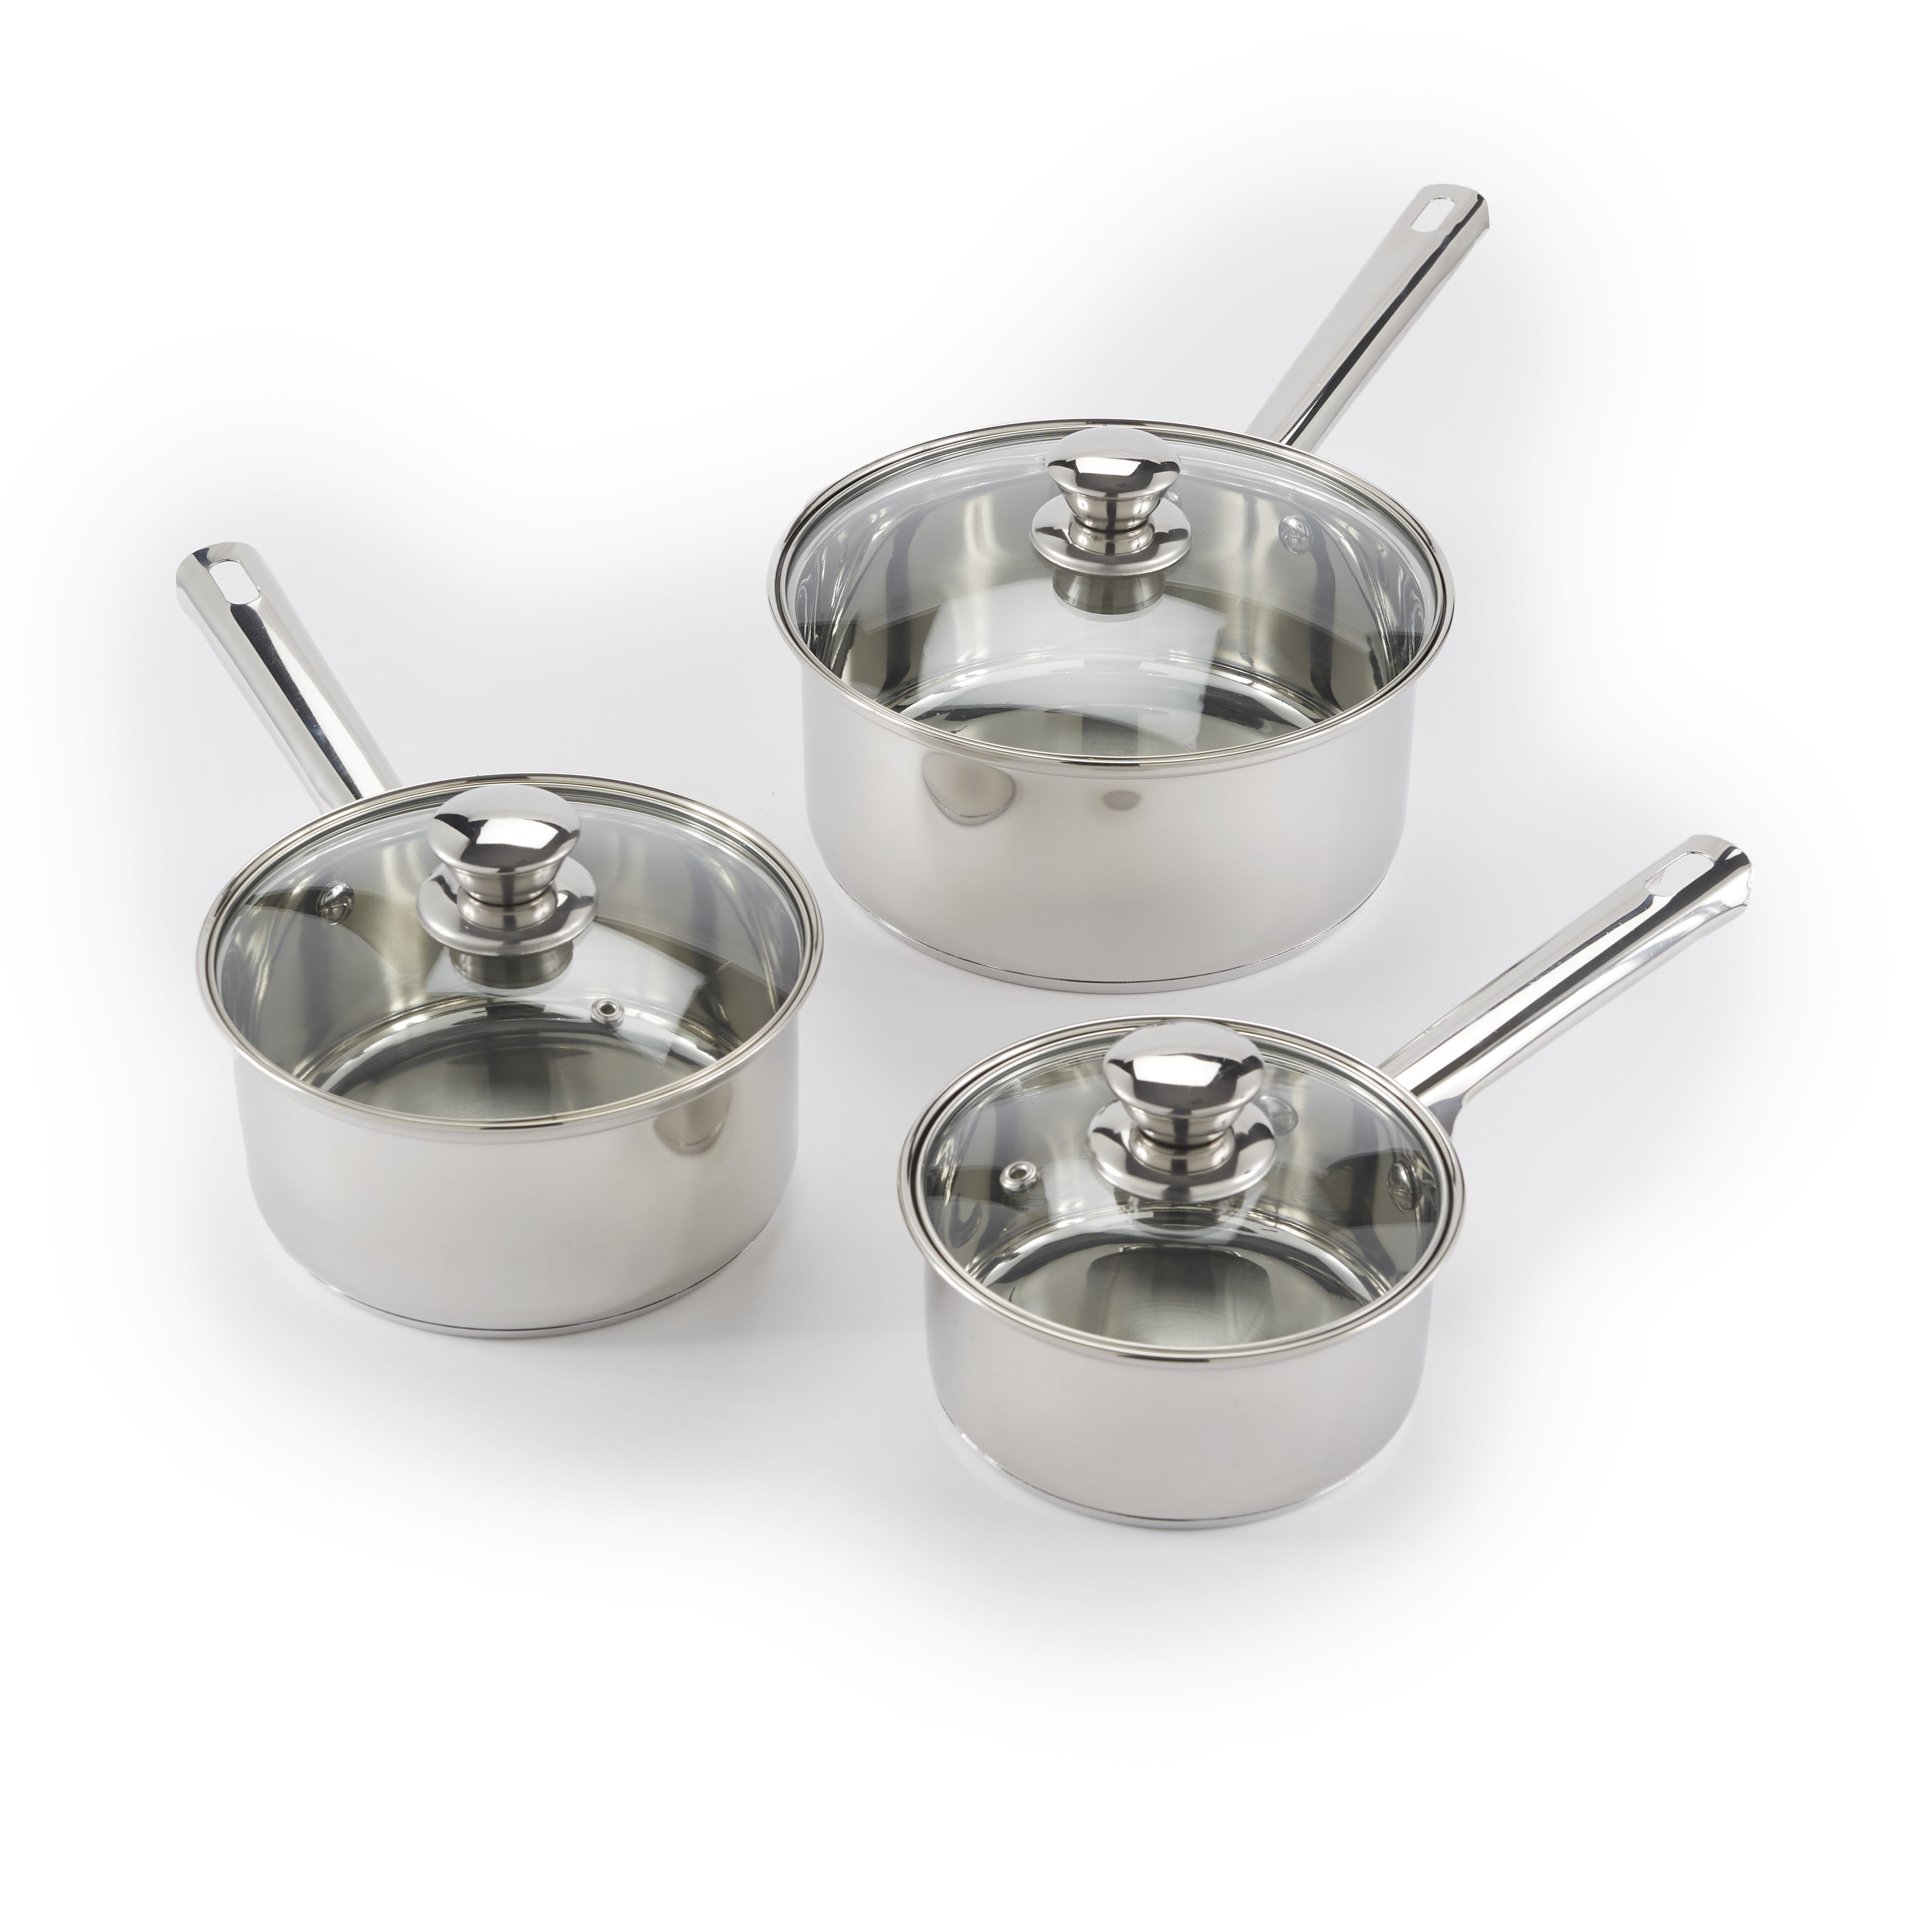 Sauce Pan Set - Stainless Steel Kitchen Cookware with Lids - Set of 3